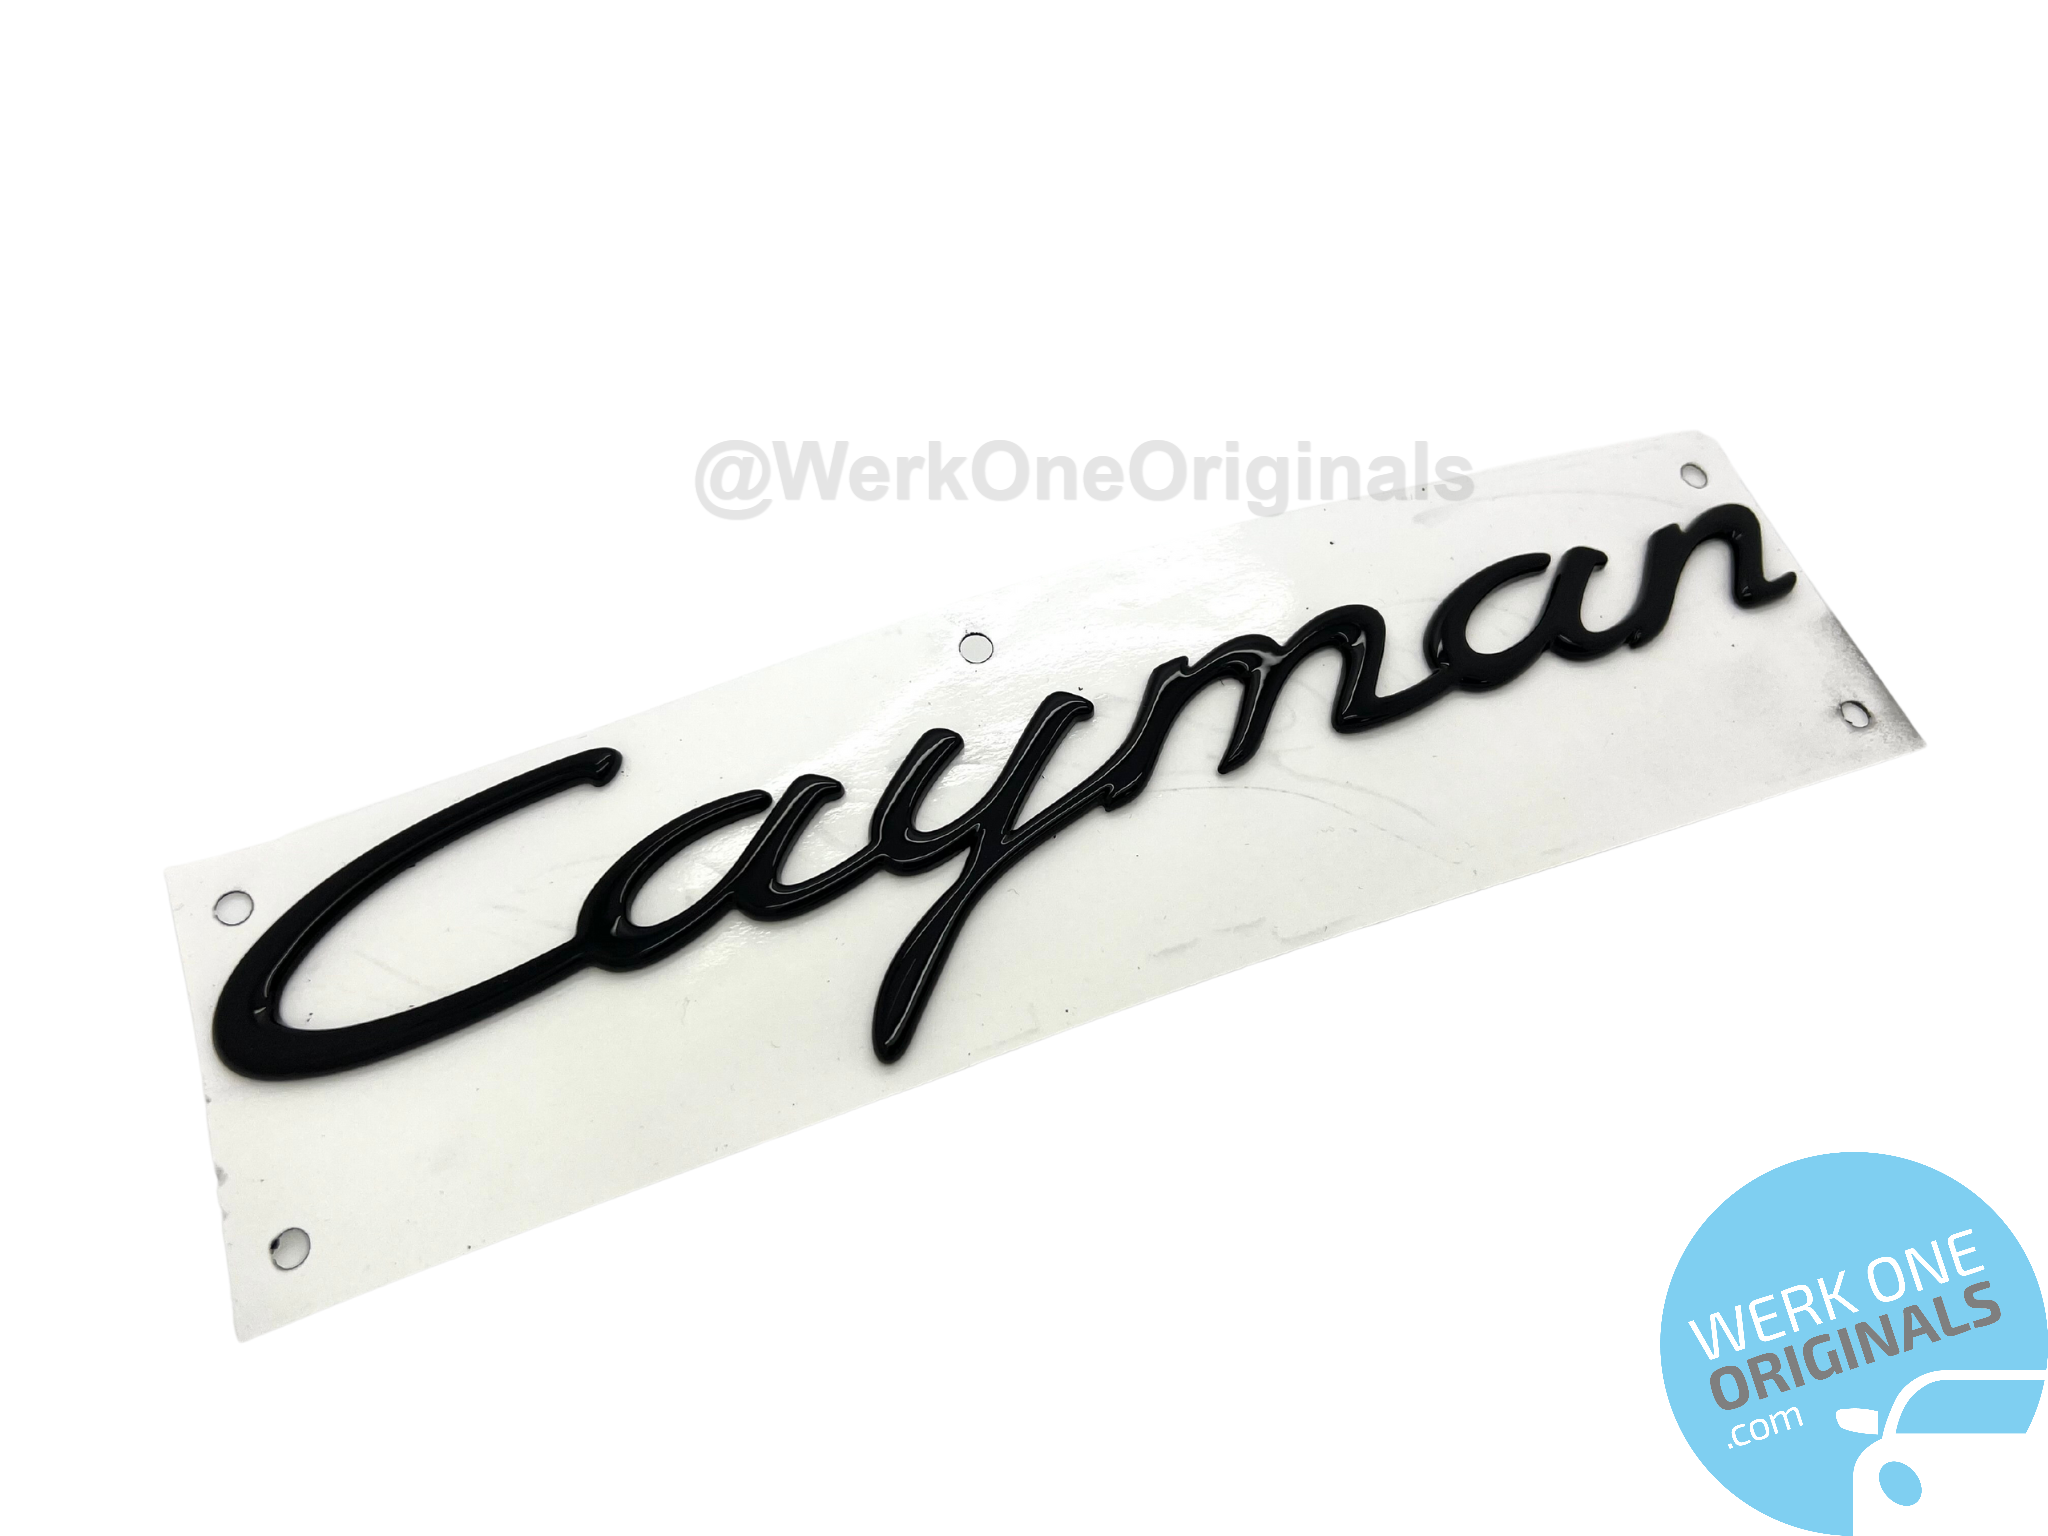 Porsche Official 'Cayman S' Gloss Black Rear Badge Decal for Cayman S Type 987 Models